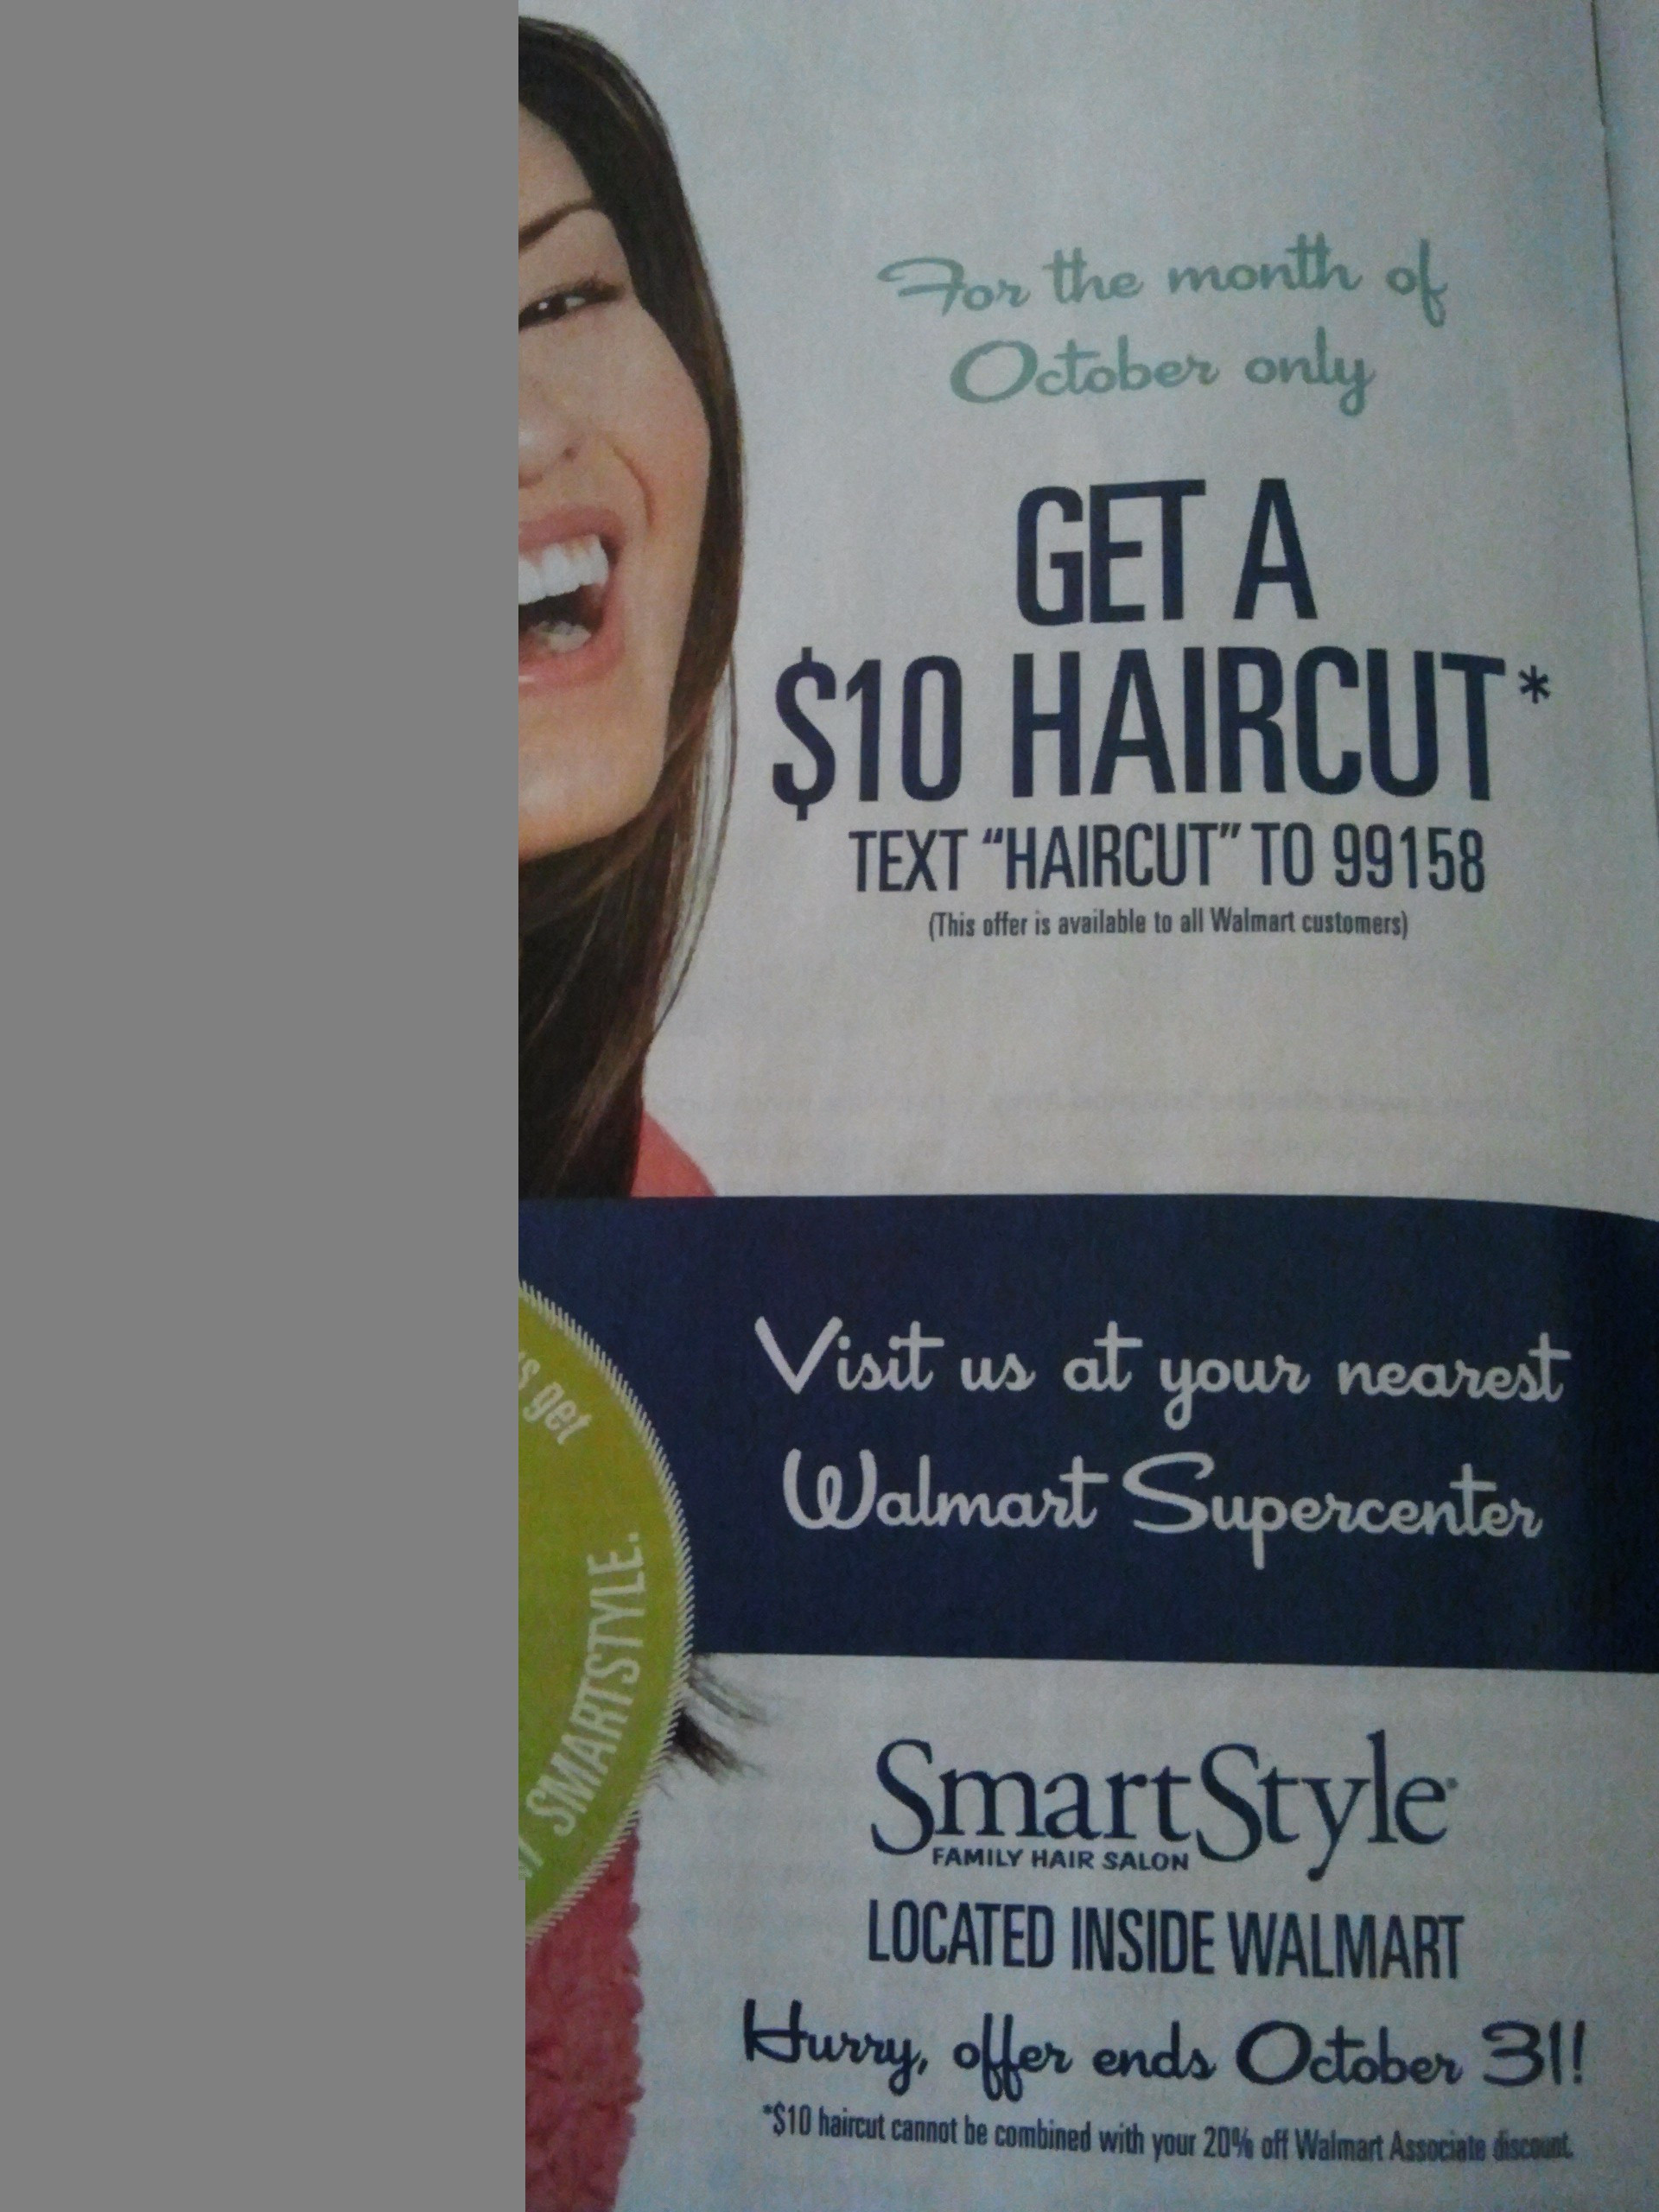 Smart Style Coupons For Haircuts
 walmart smart style haircut coupons walmart smart style